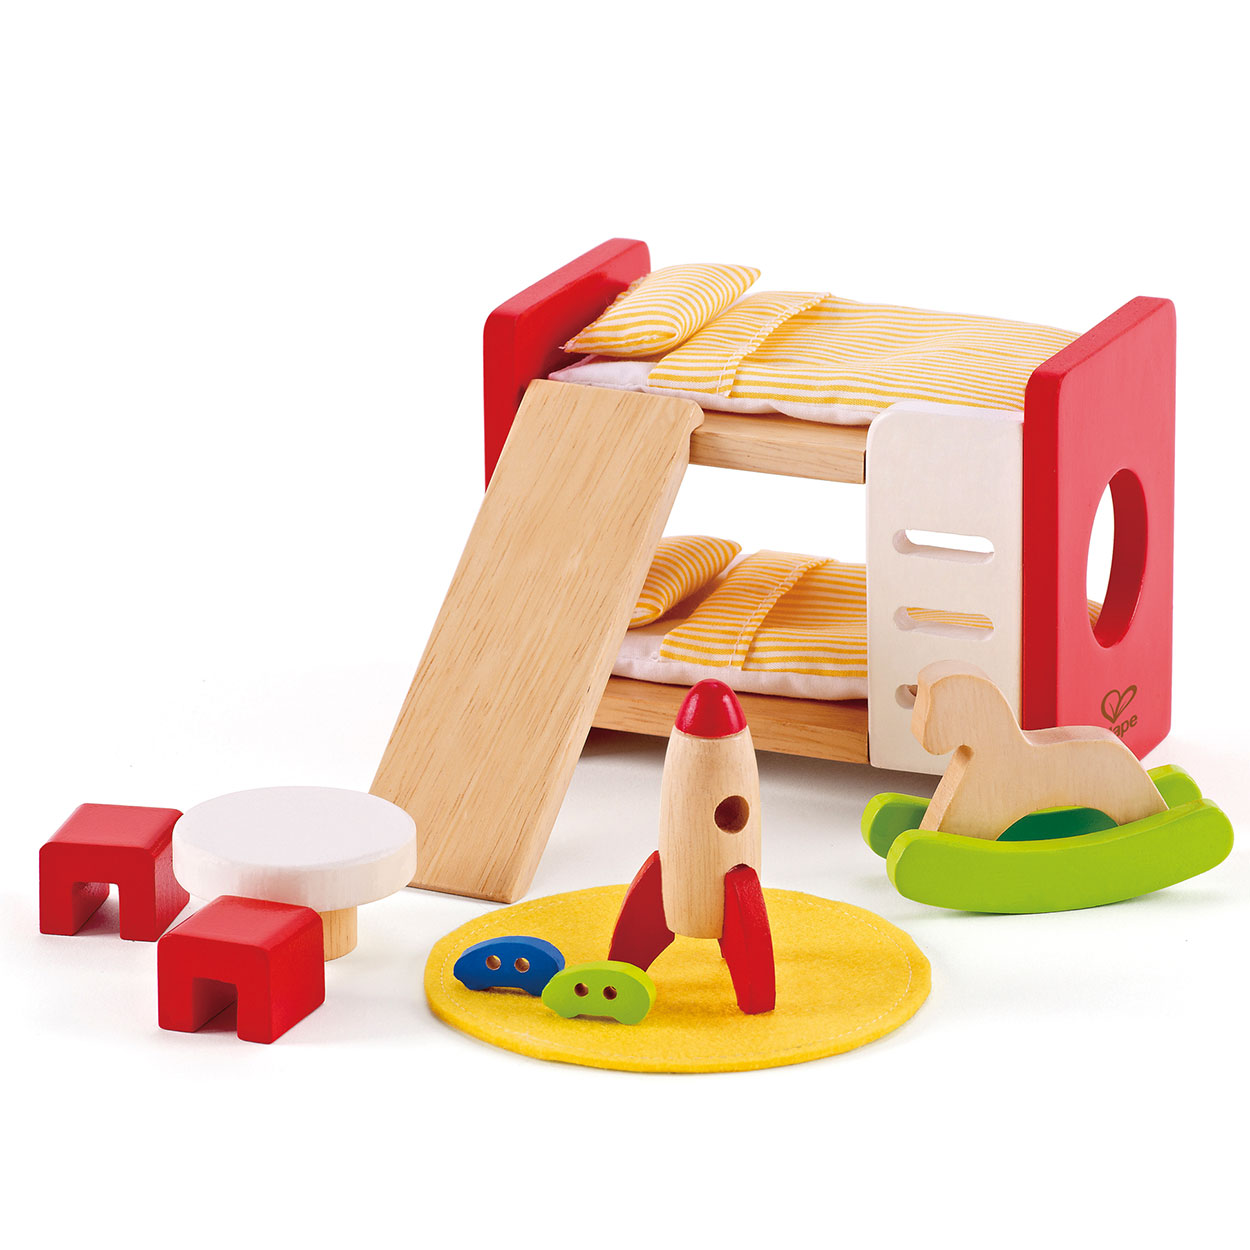 Hape Wooden Toys, Educational Toy, Dollhouse, Wooden Puzzle